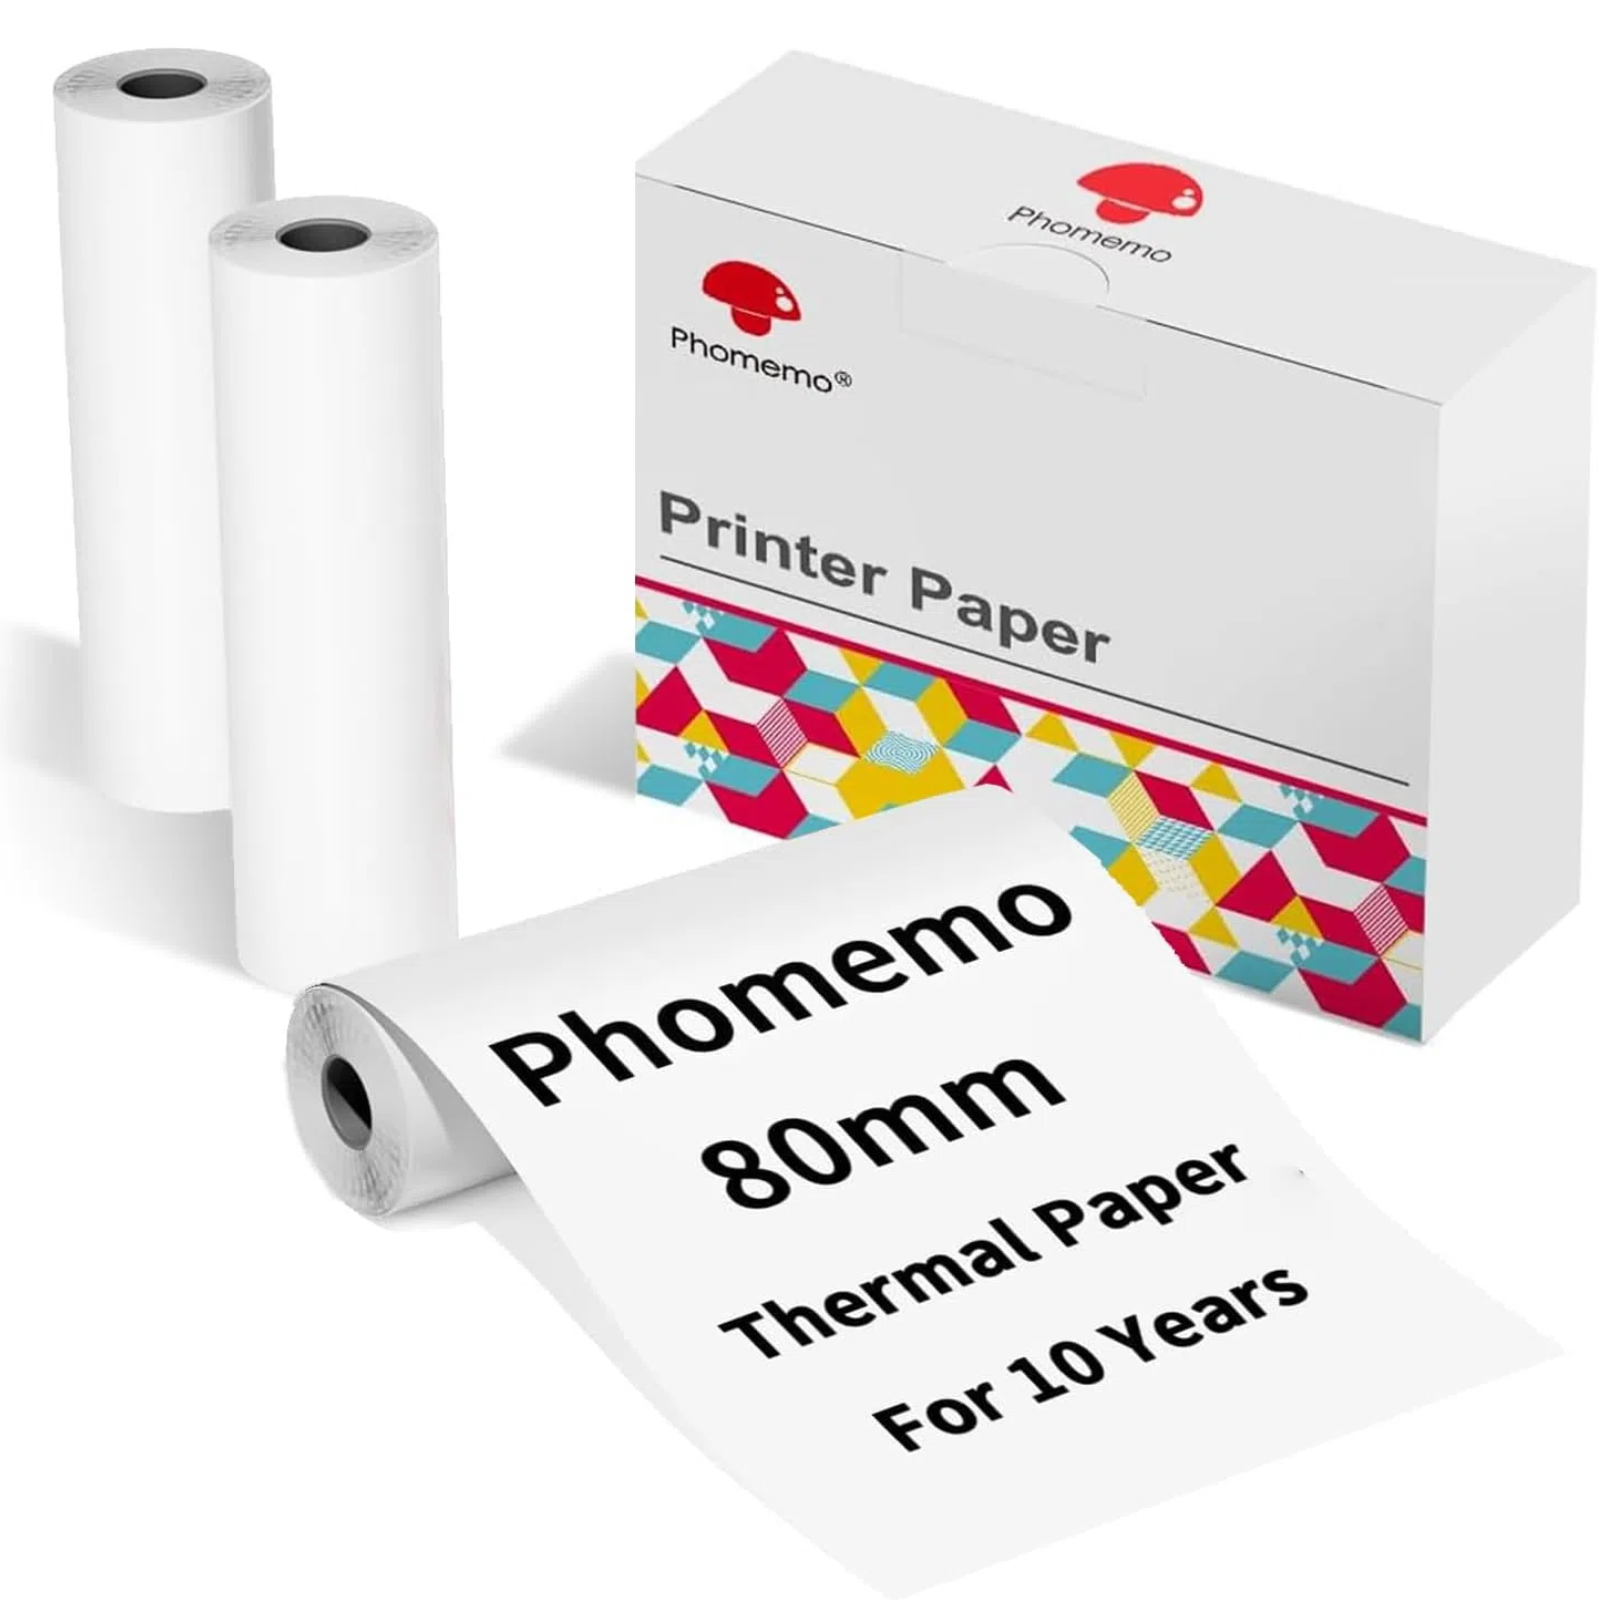 Phomemo 80mm White 10-Year-Lasting Non-adhensive Thermal Paper for M03/ M03AS/ M04S/ M04AS丨3 Rolls